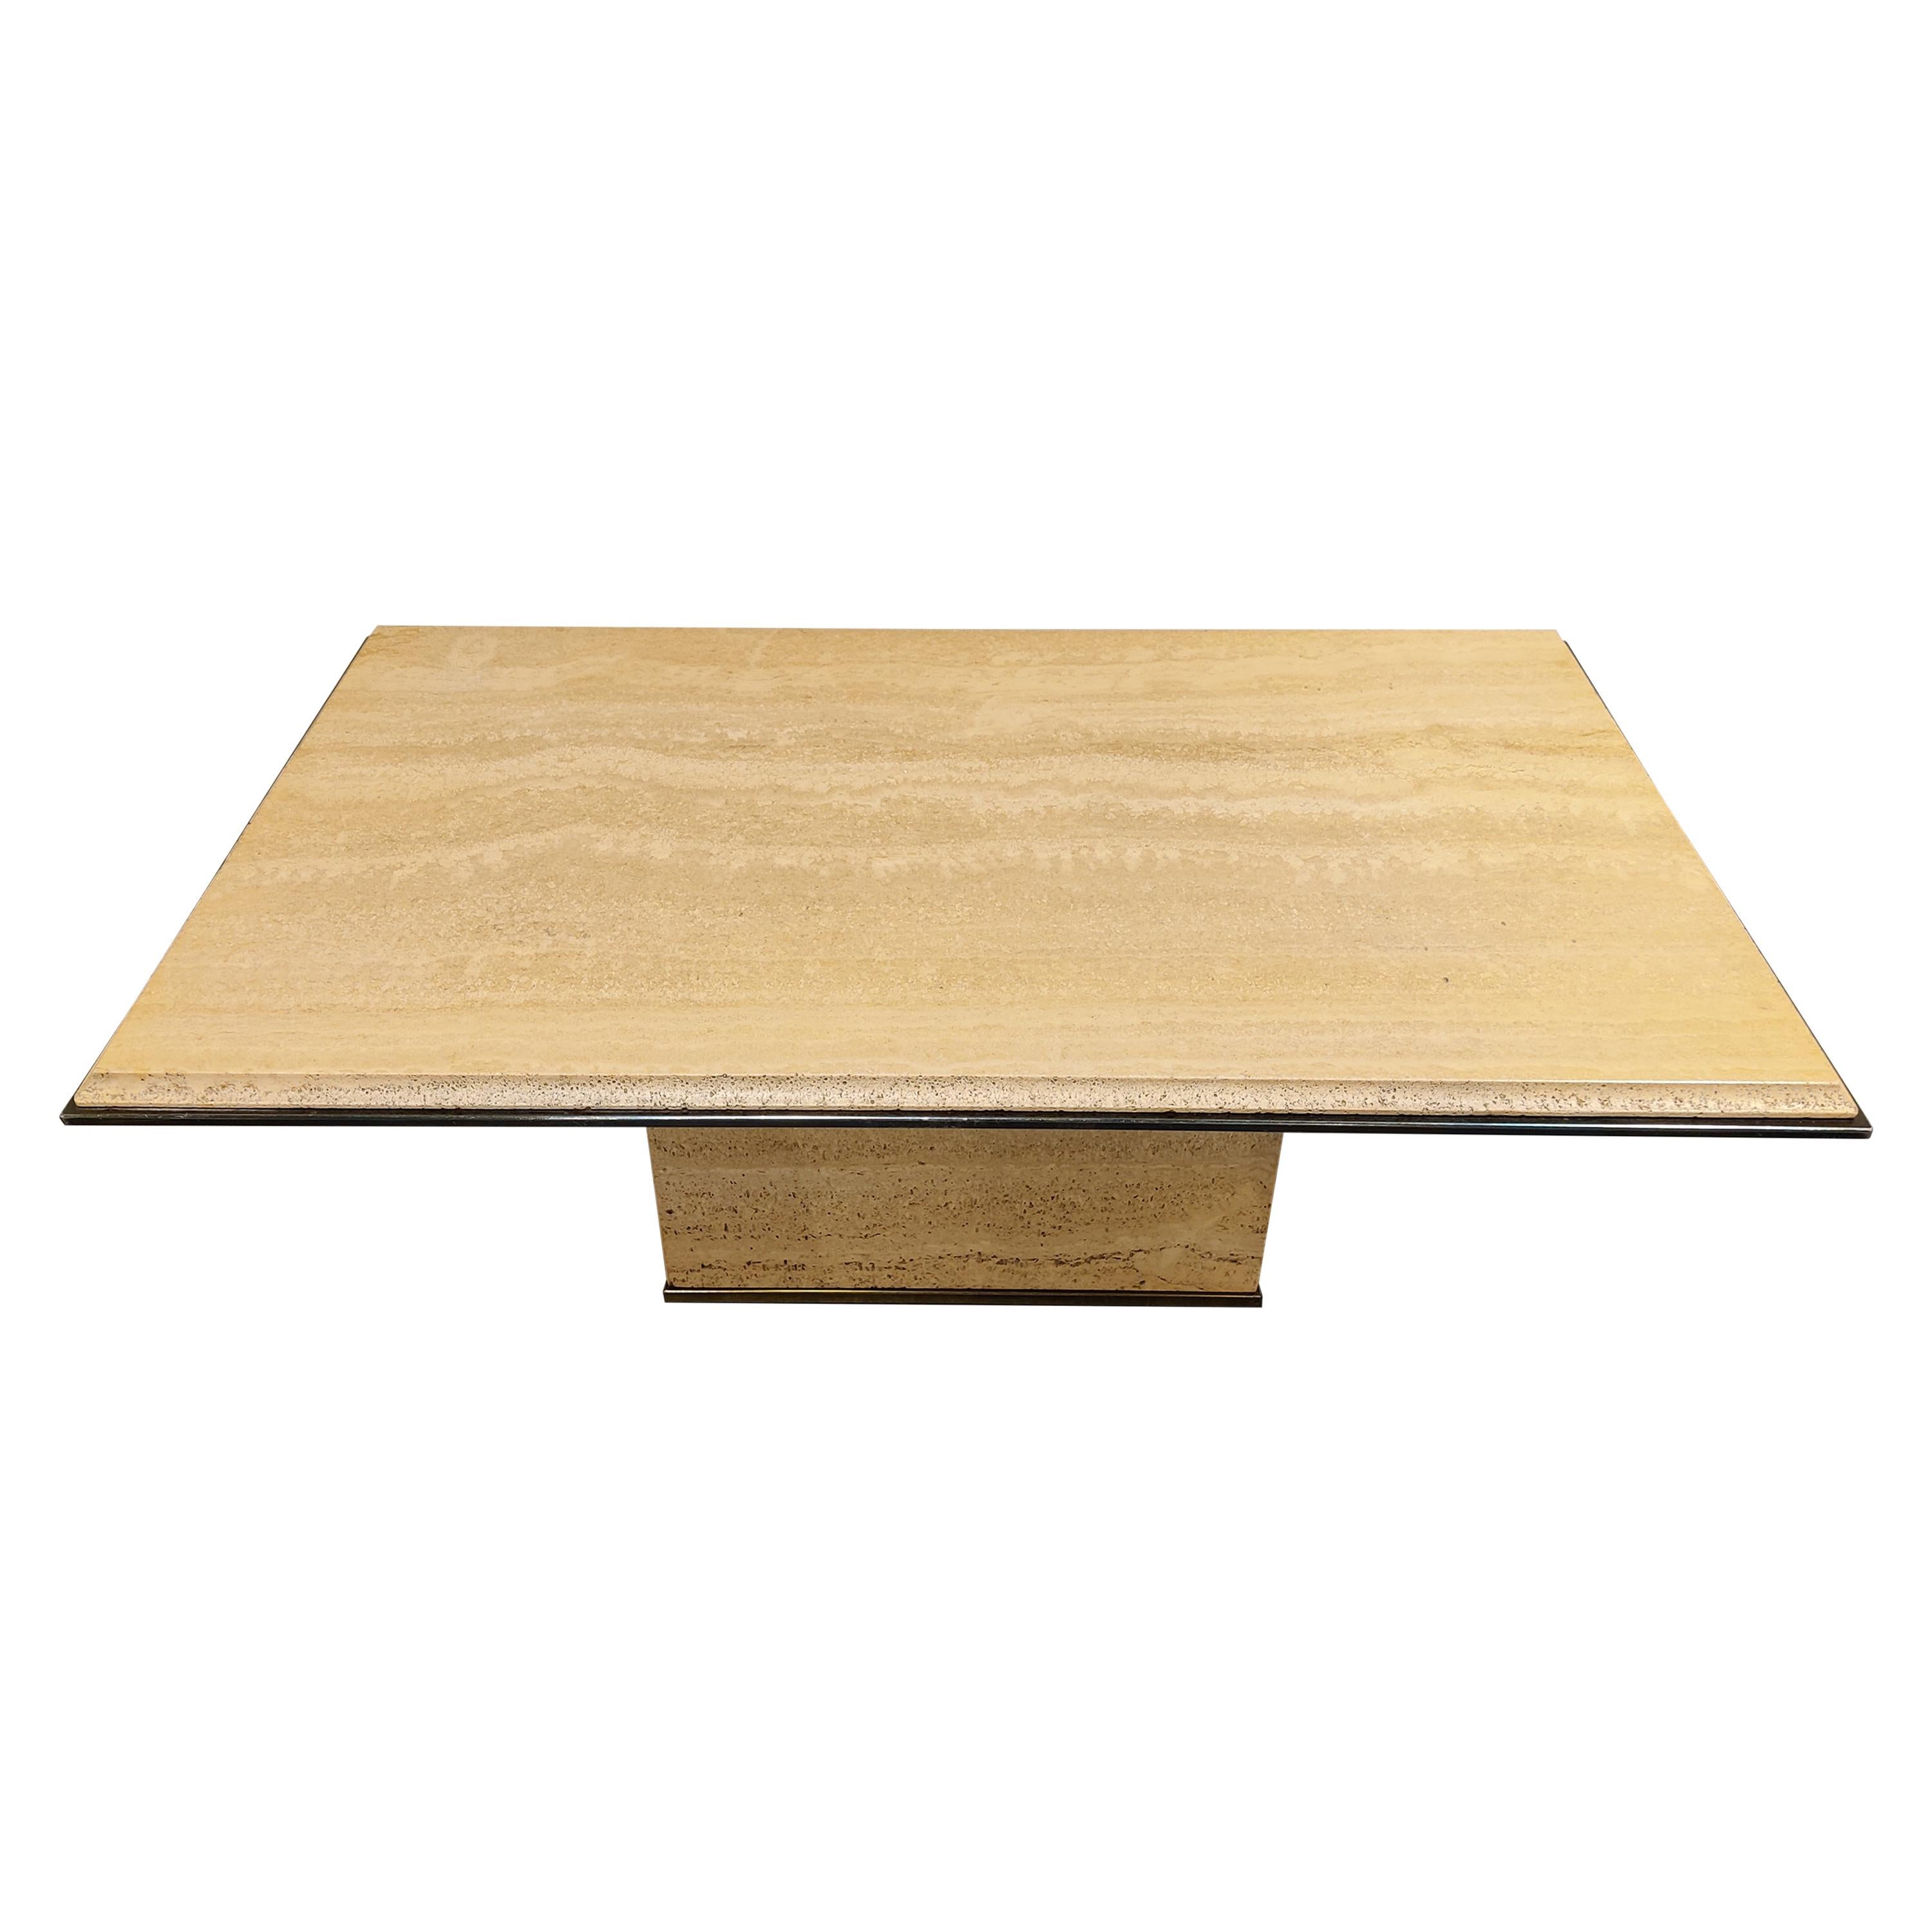 Vintage Travertine and Brass Coffee Table by Fedam, 1970s For Sale